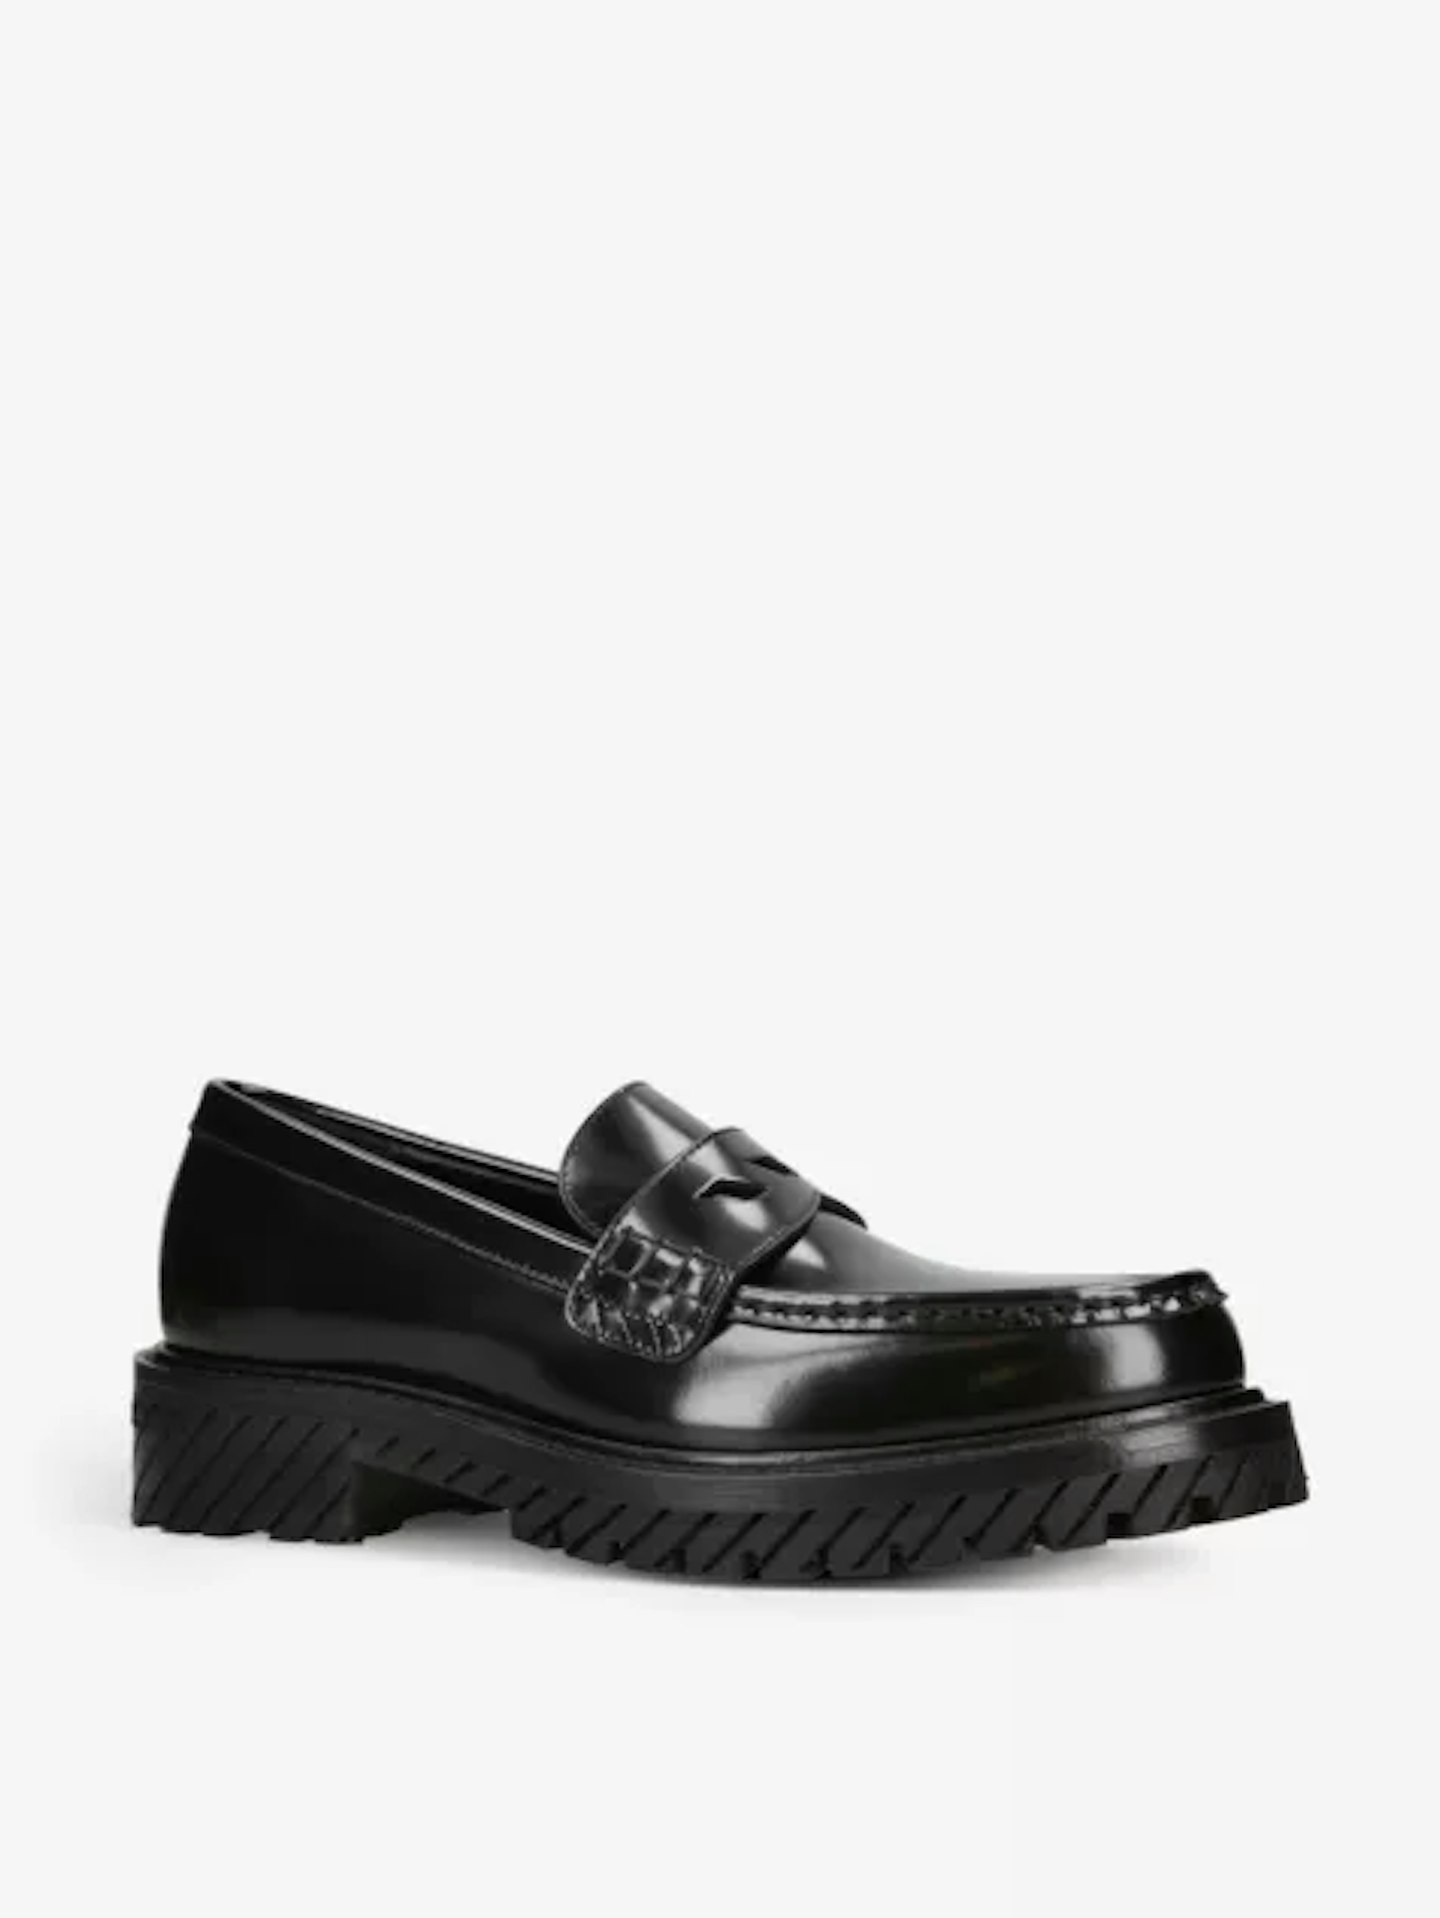 OFF-WHITE C/O VIRGIL ABLOH Combat Leather Loafers